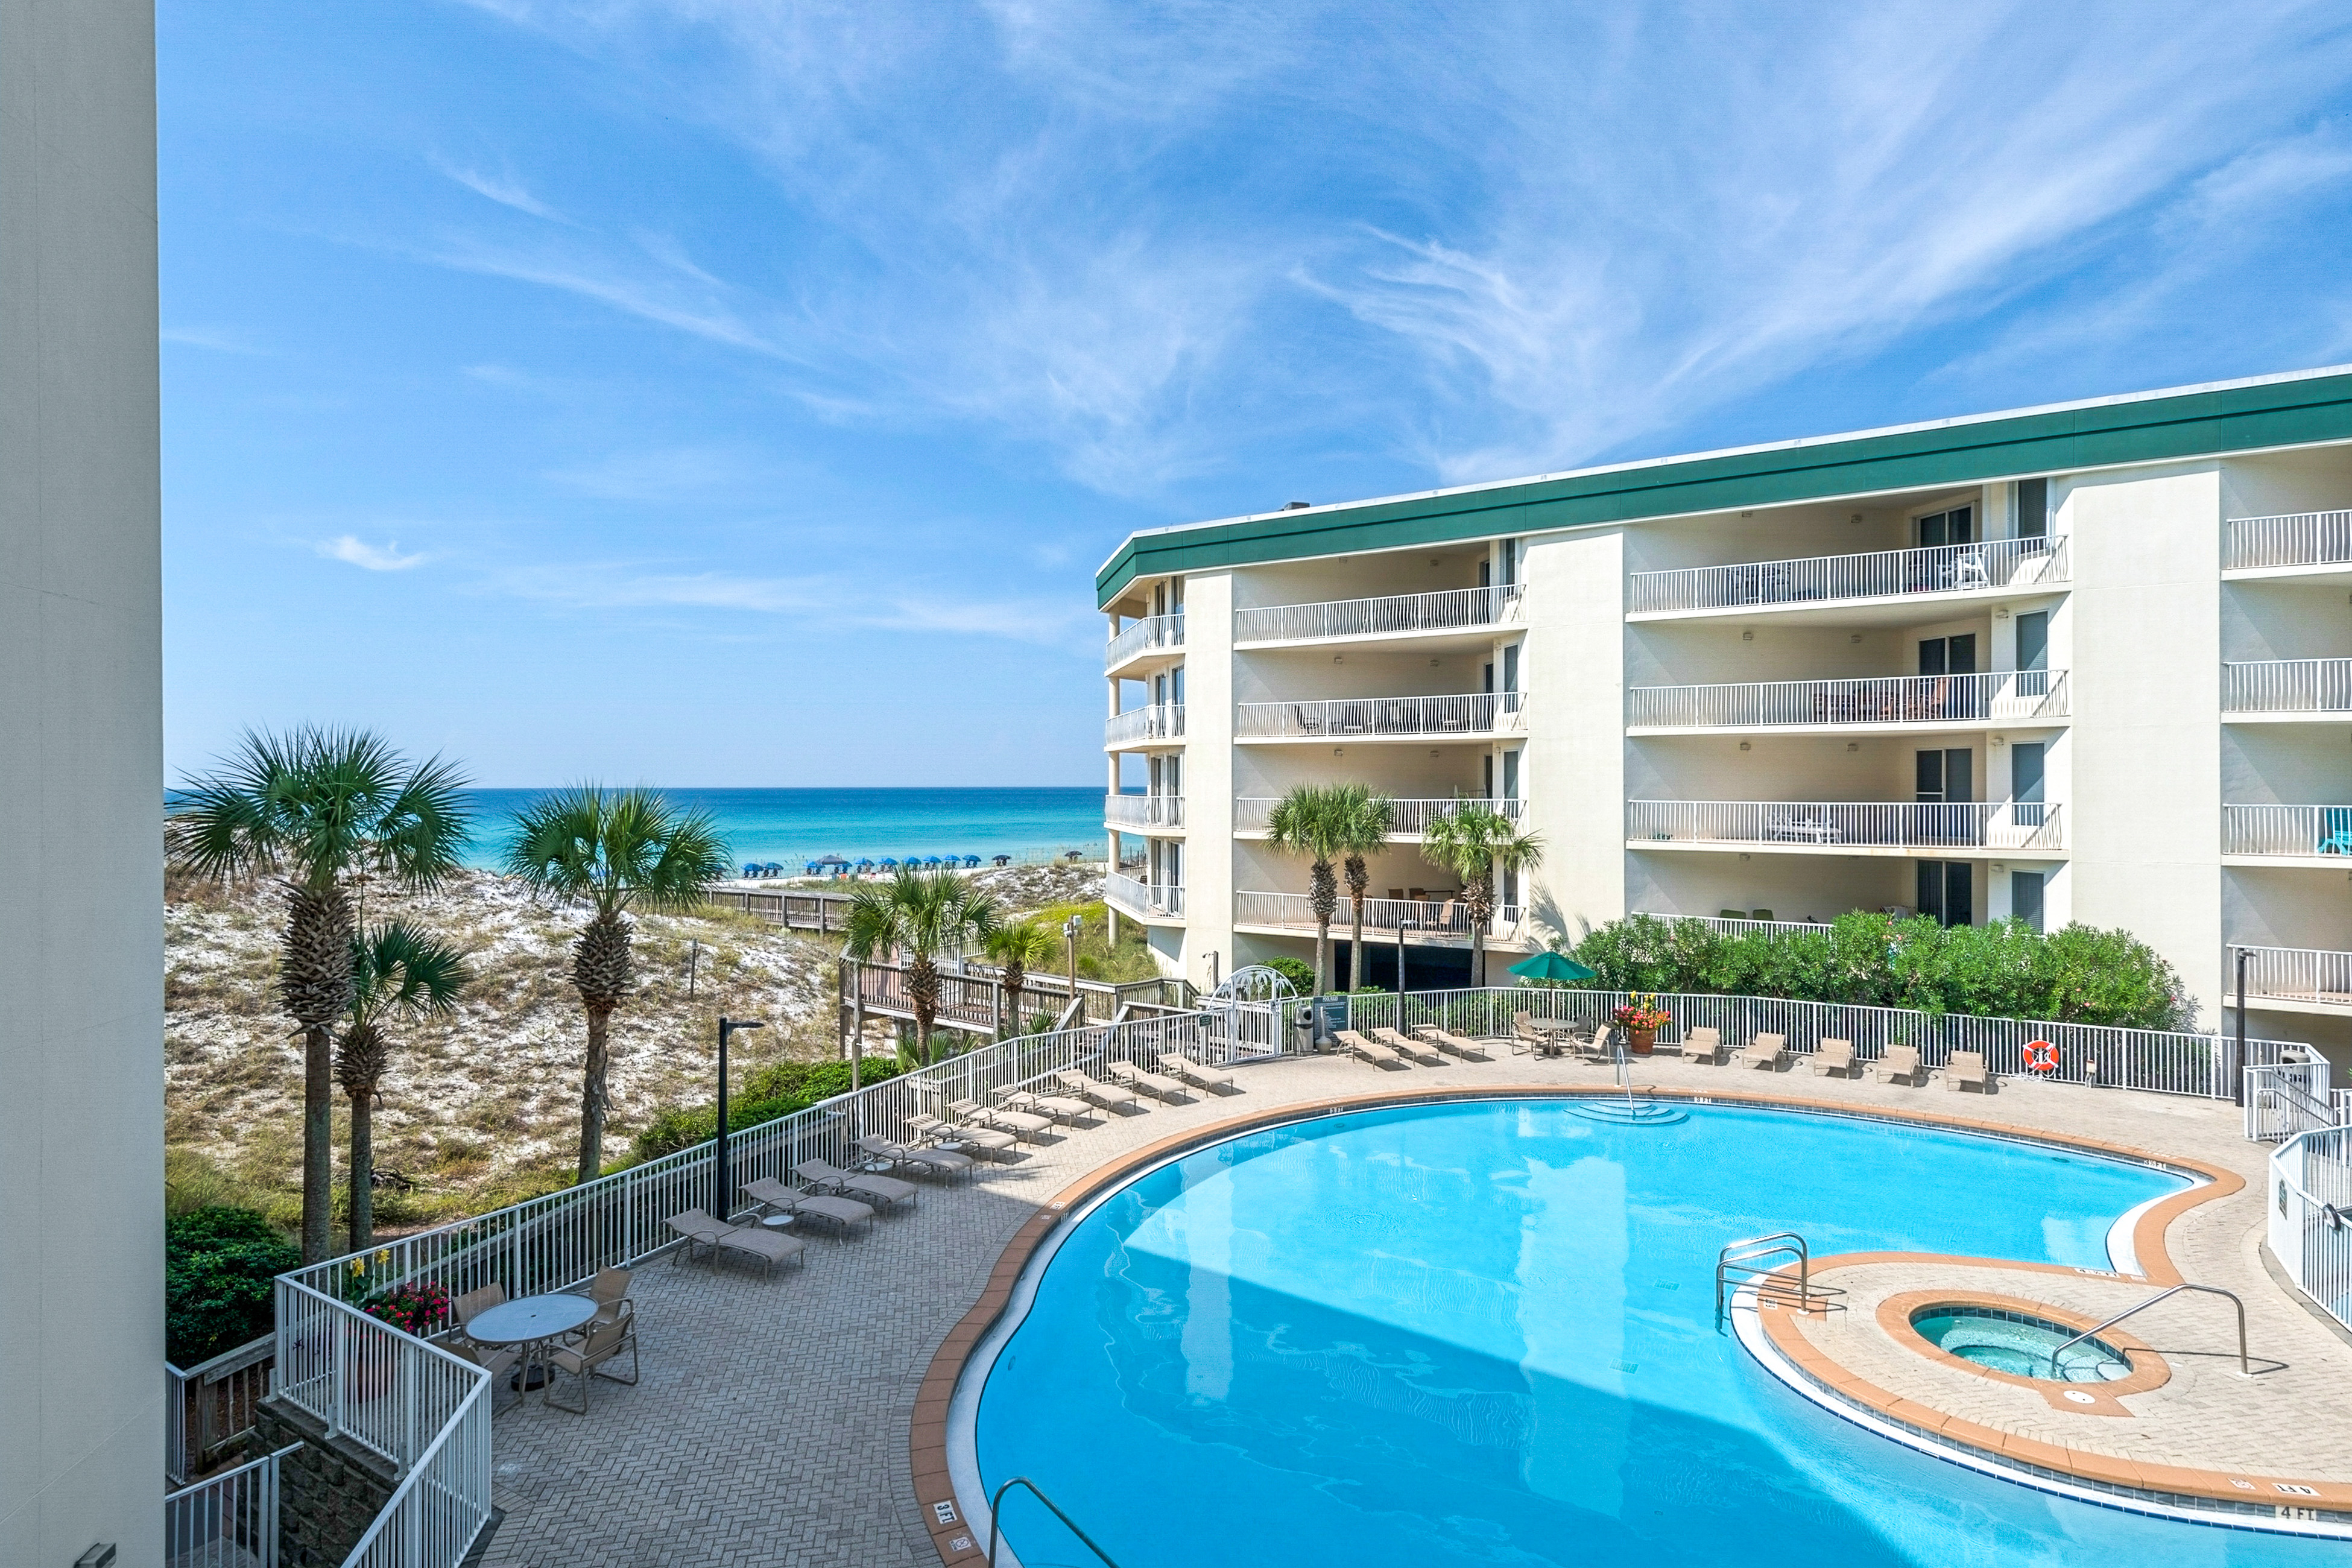 Dunes of Seagrove A206 Condo rental in Dunes of Seagrove in Highway 30-A Florida - #12